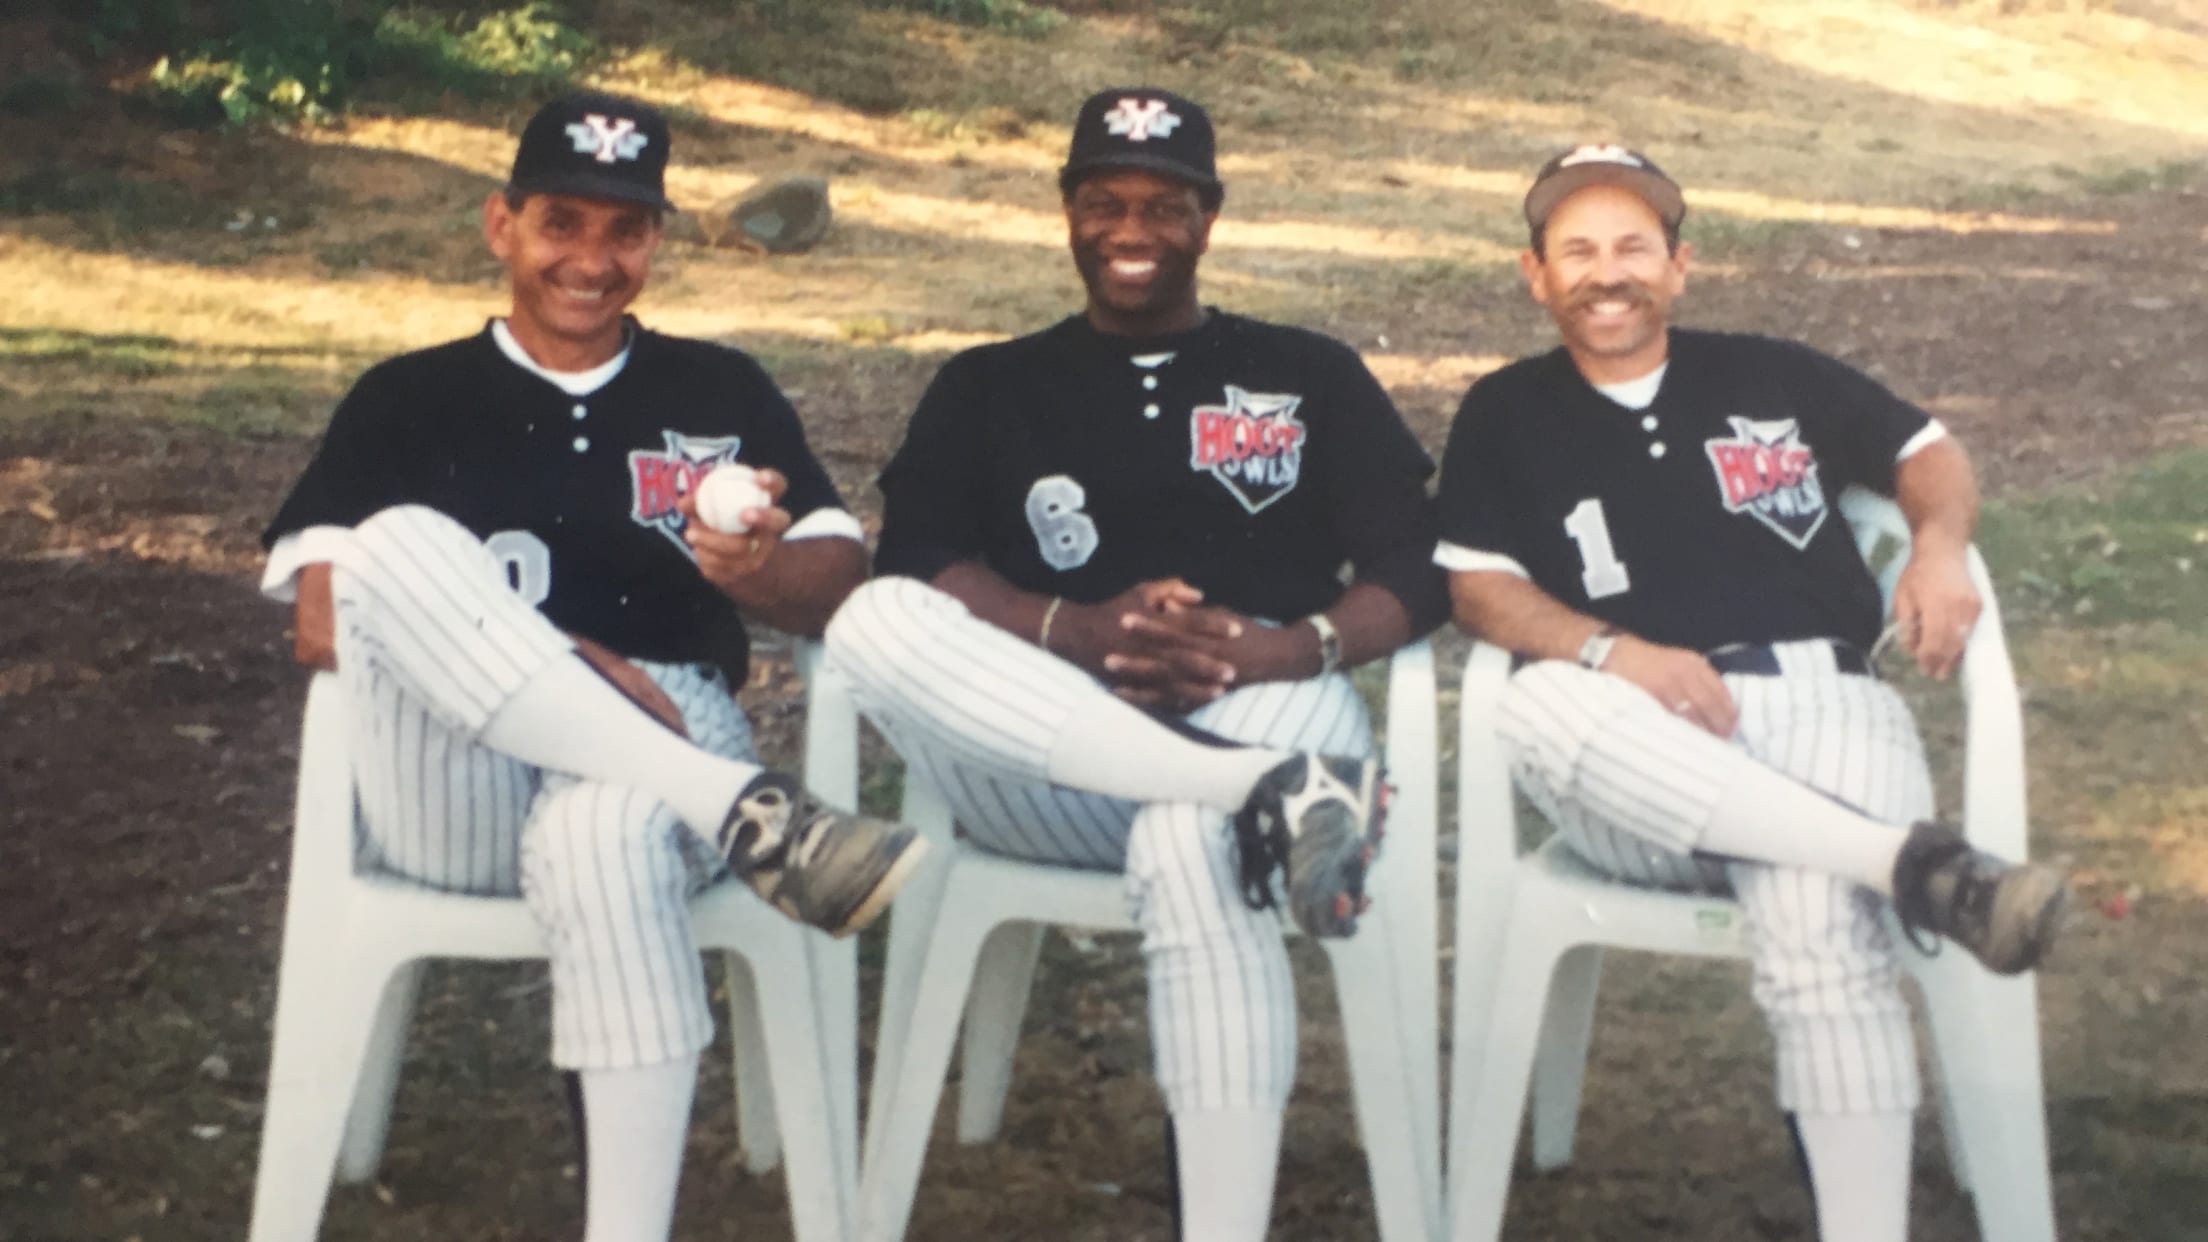 How five players on the awful 1999 Marlins made the team unforgettable